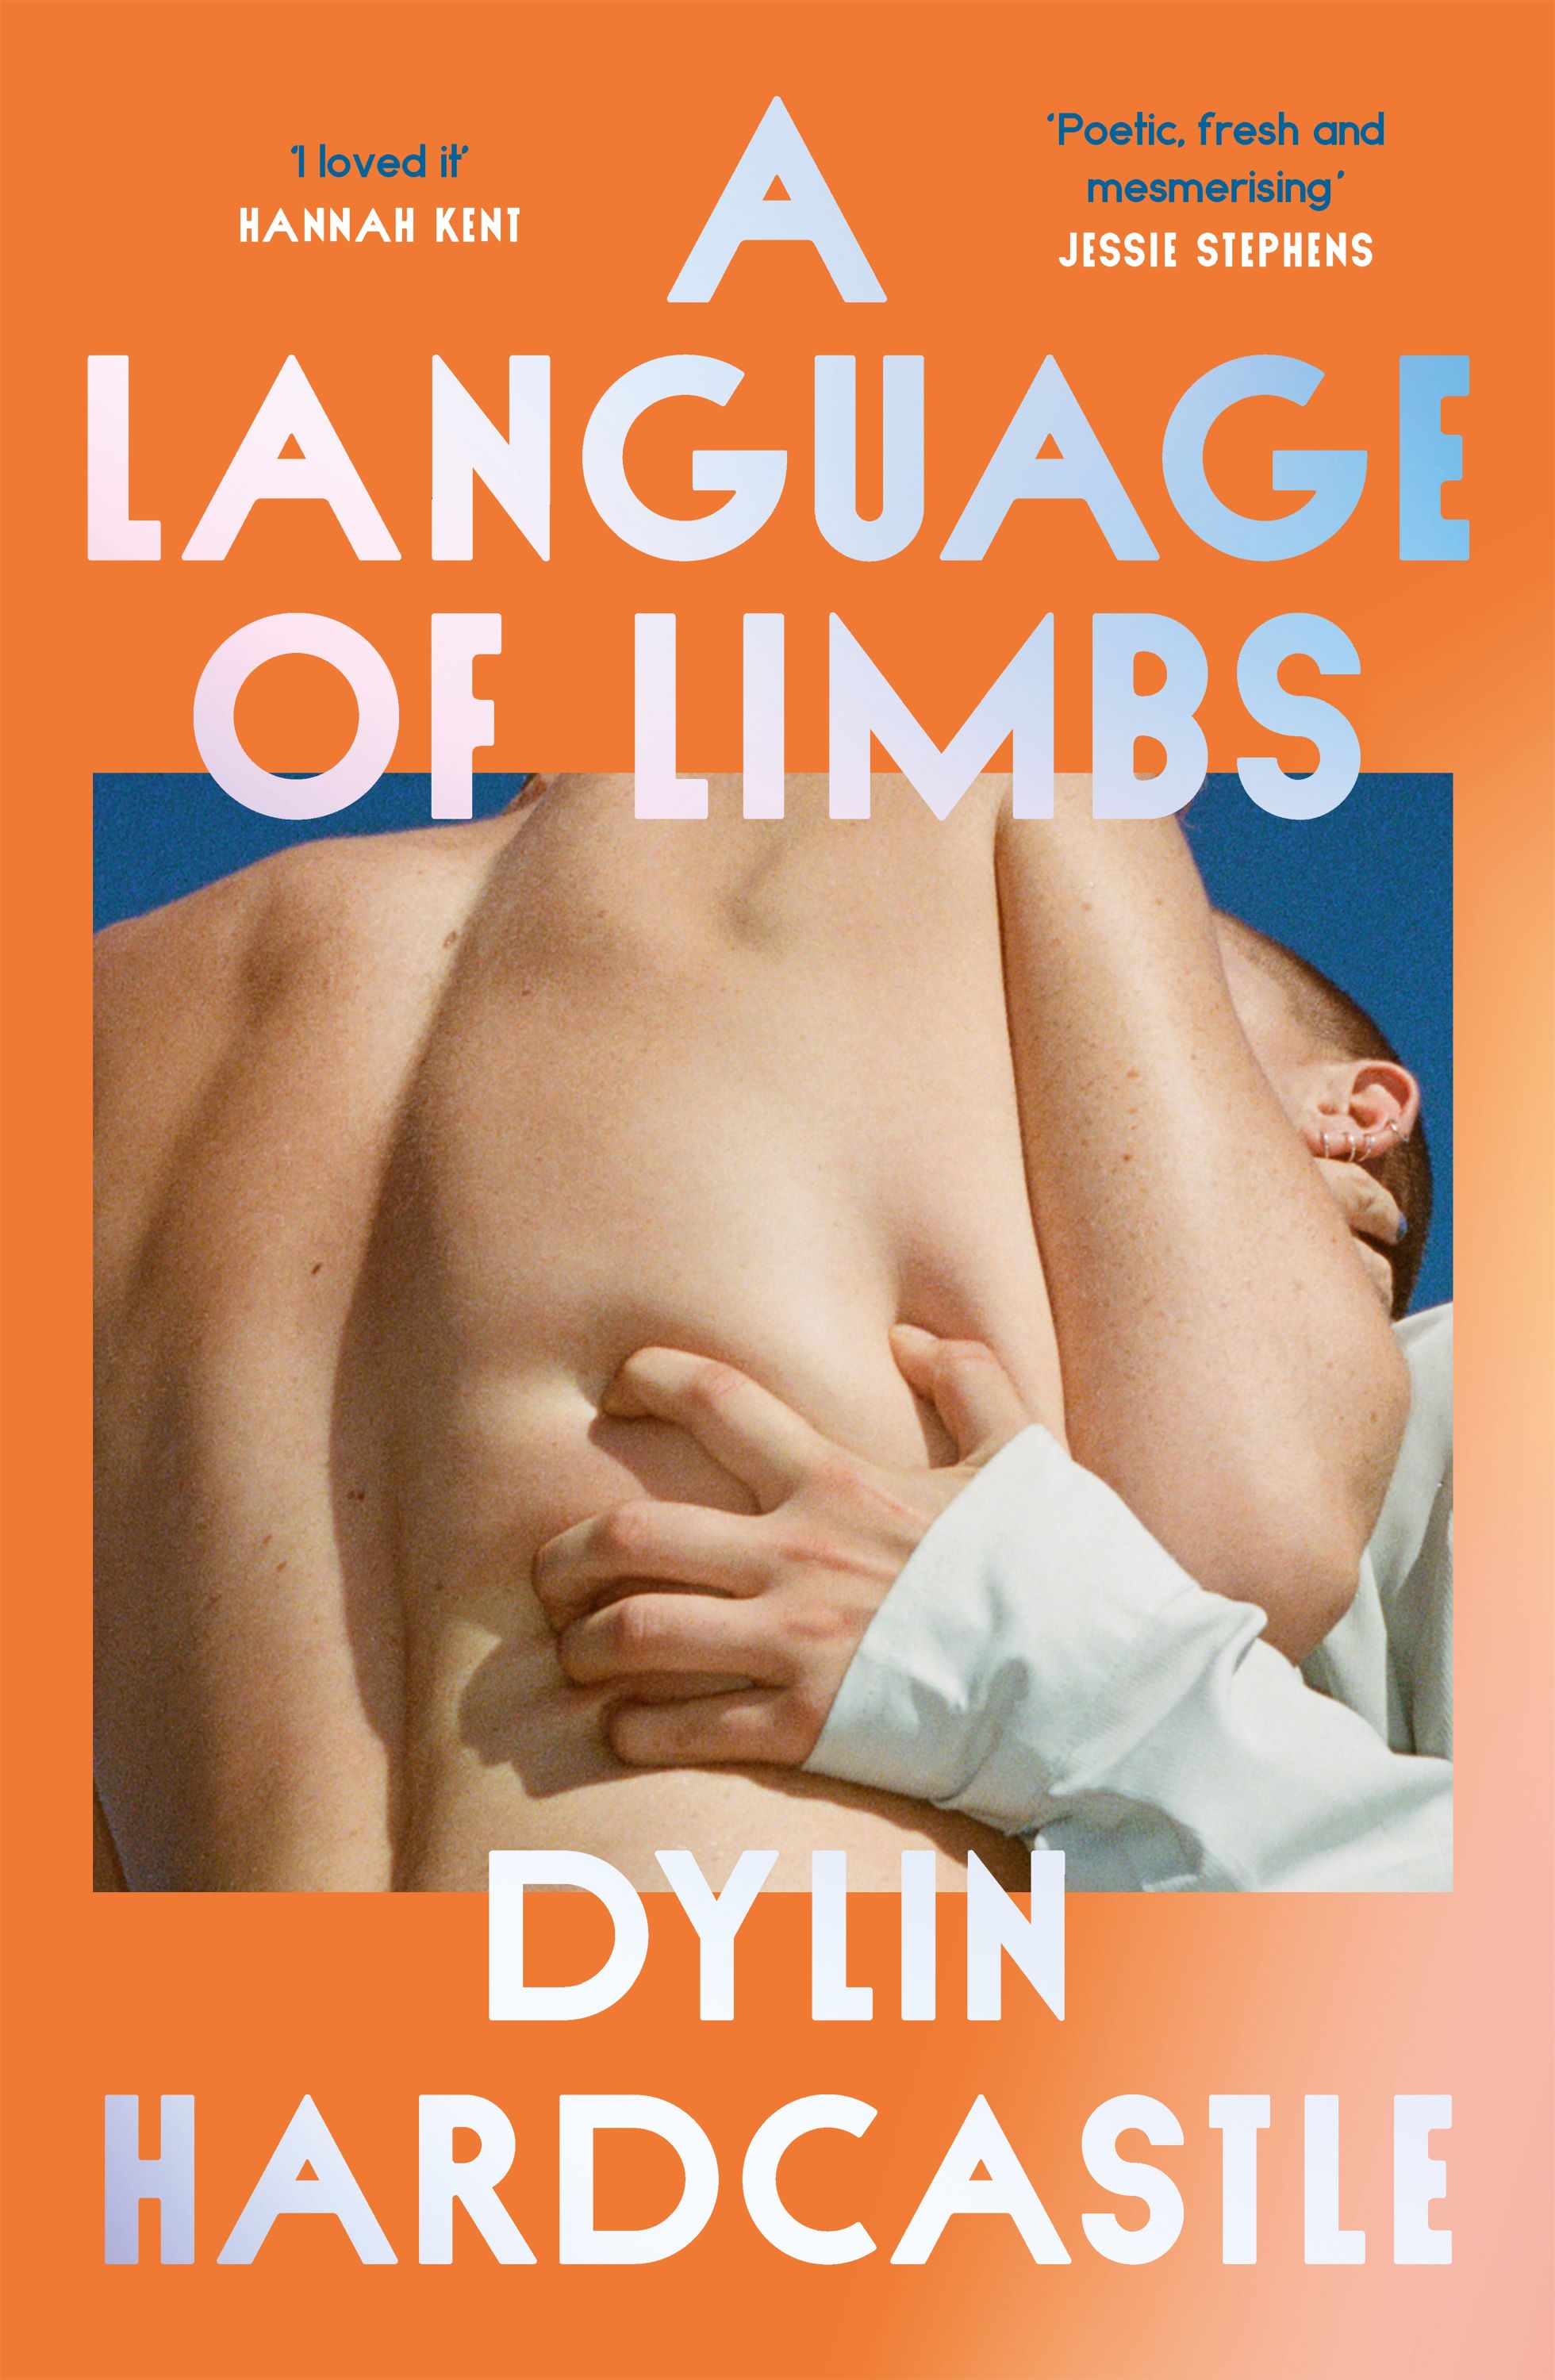 A book cover with a photo of two people embracing, one with a hand gripping the other's bare back, on an orange background